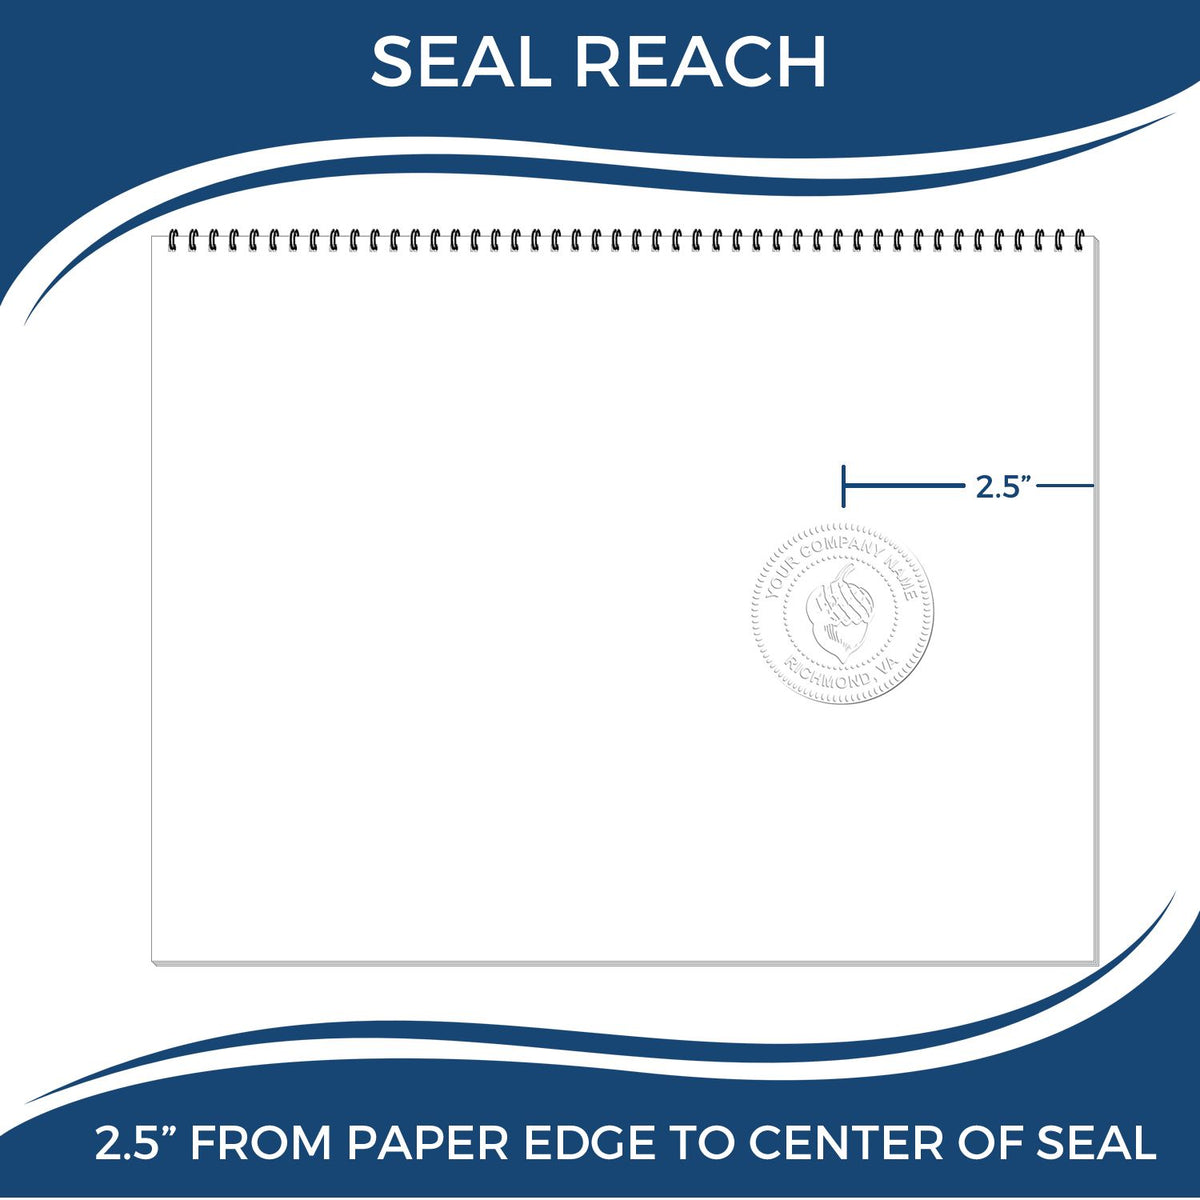 An infographic showing the seal reach which is represented by a ruler and a miniature seal image of the Long Reach Hawaii PE Seal